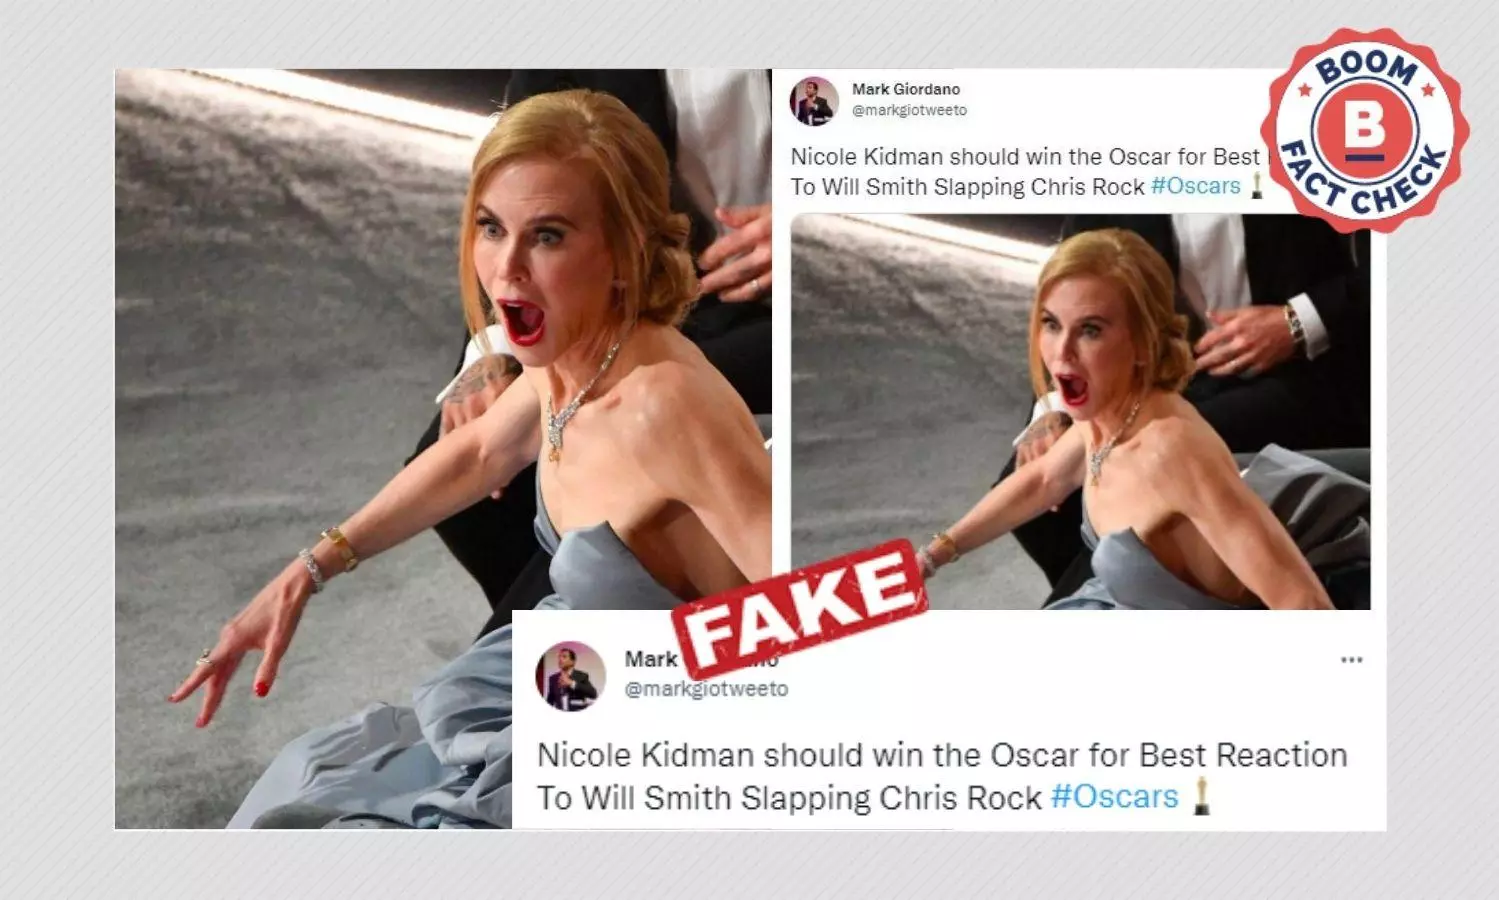 Shocked Nicole Kidman Pic Not Related To Will Smith-Chris Rock Altercation